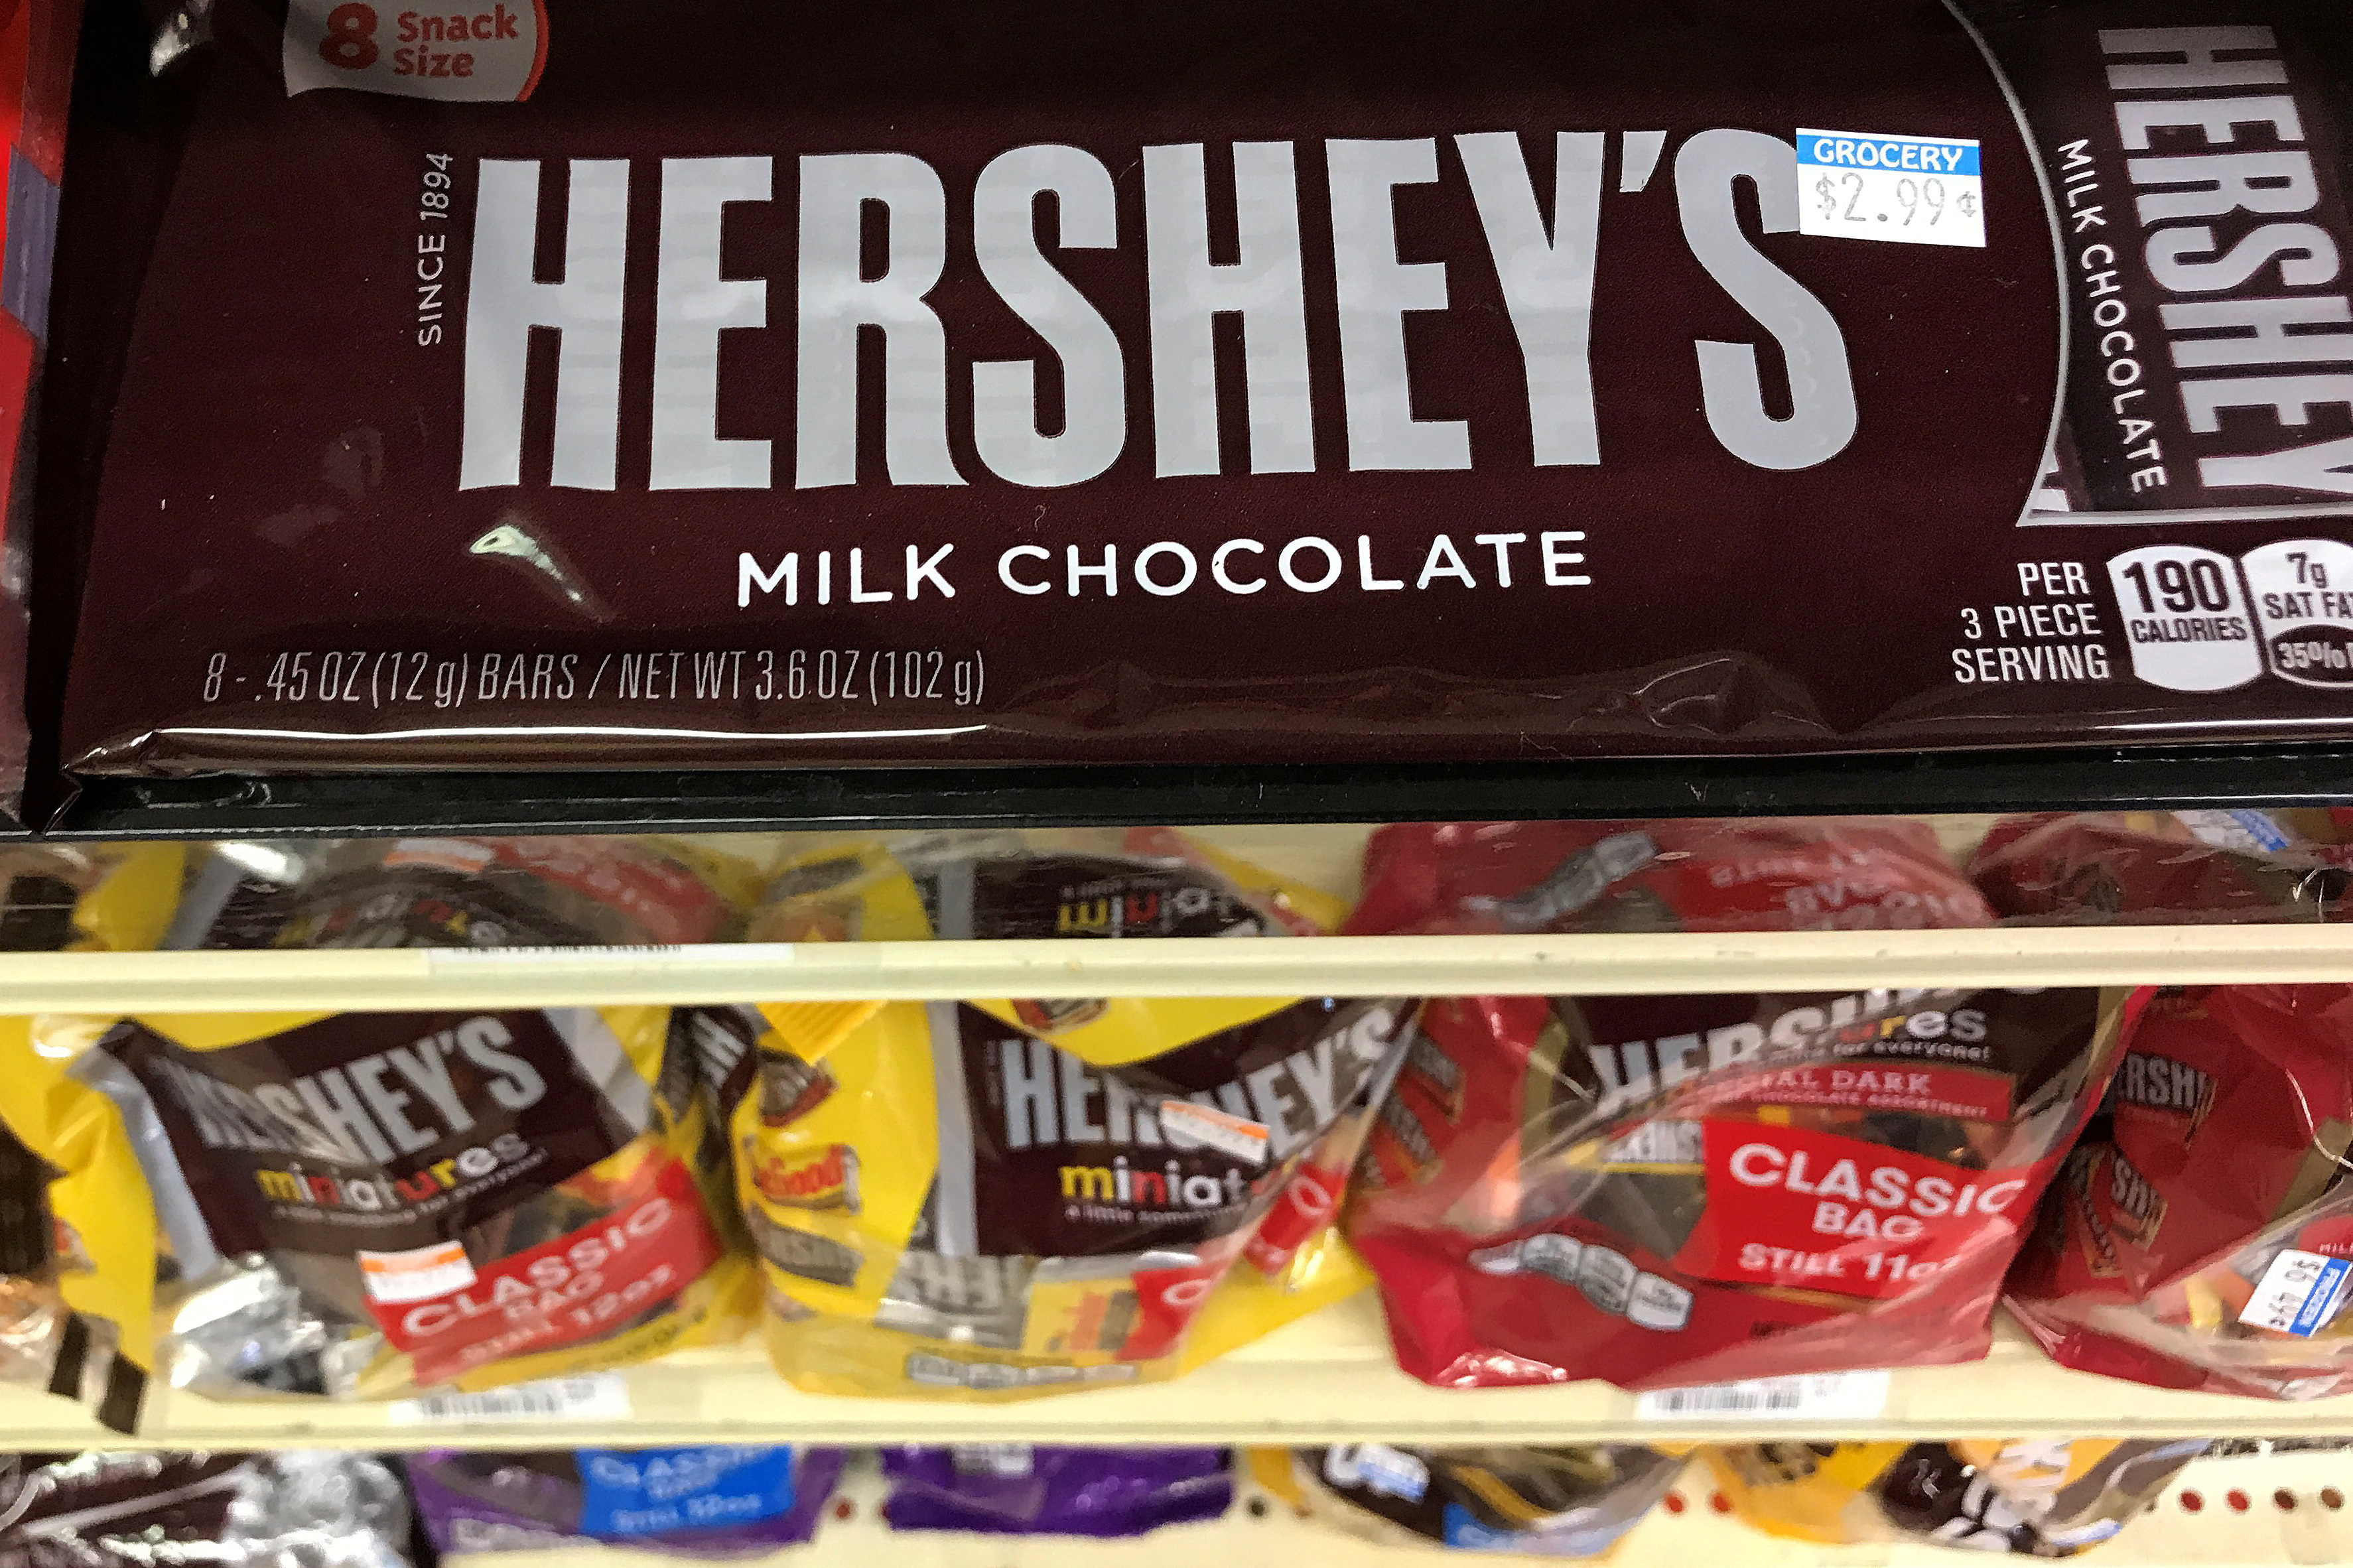 Hershey's chocolates are pictured for sale on a store shelf in the Manhattan borough of New York City